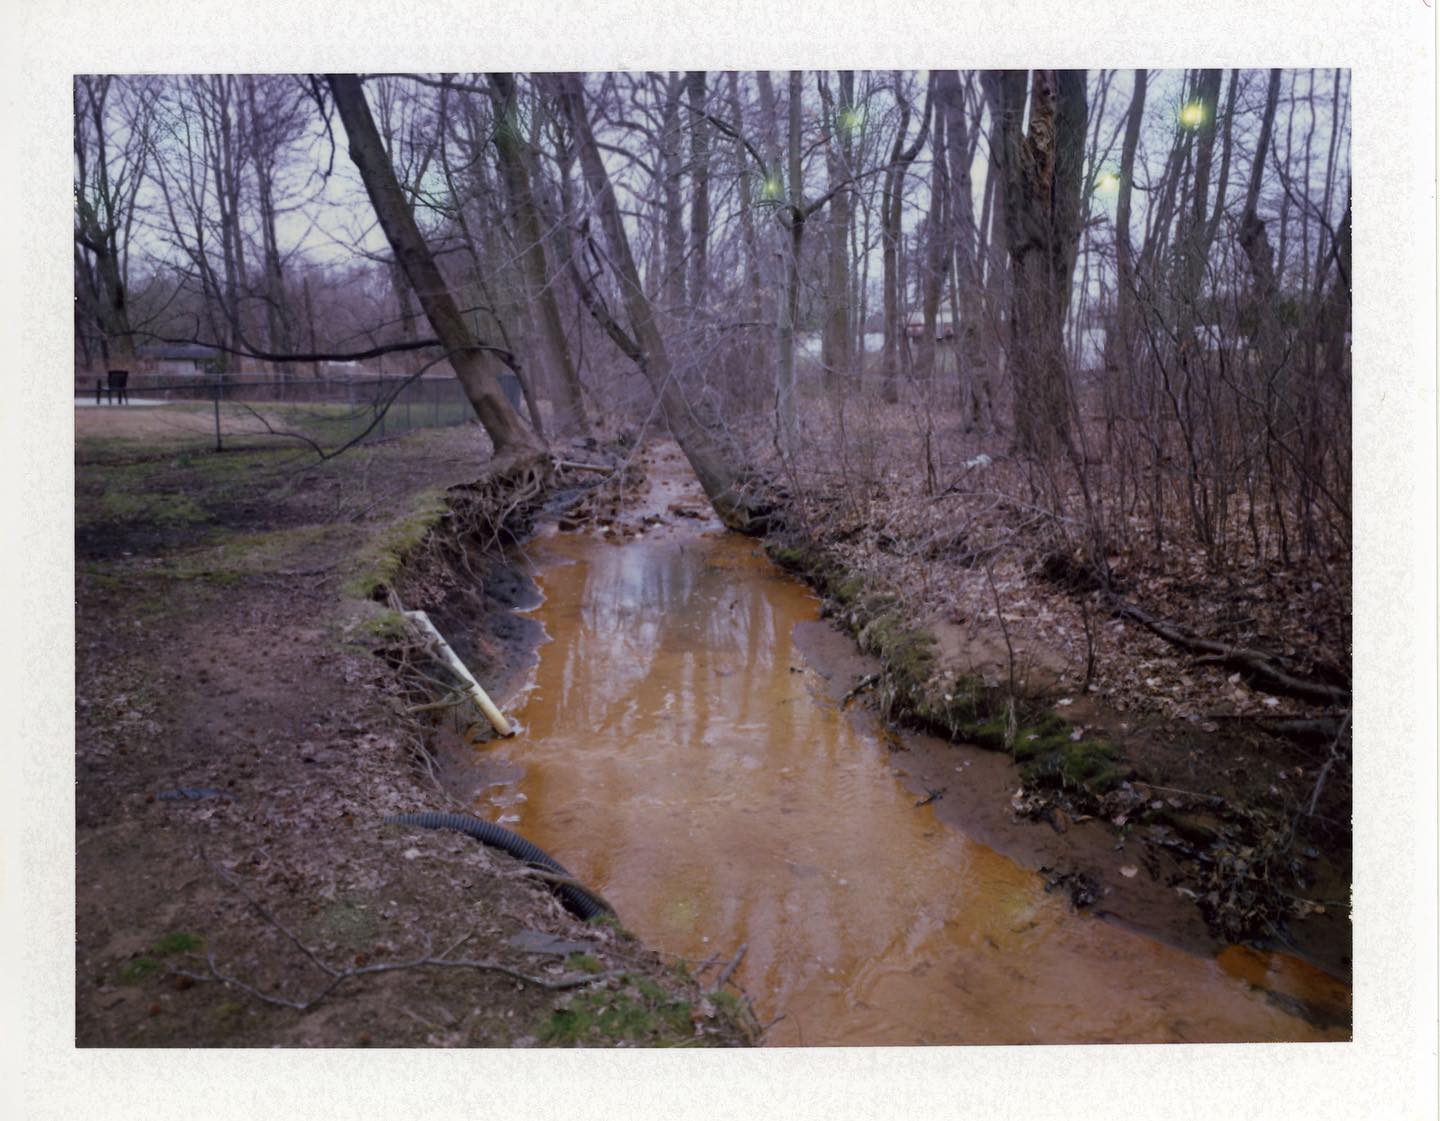 Mill Brook

I needed to get a Mamiya Press lens for the @cameradactyl Brancopan that Iâm building, and I wanted a wide one to accentuate the panoramic nature of the shots that the camera is designed for. All the appropriate lenses I could find on eBay were like $300 apiece. Then there was a Mamiya Press Universal camera on the site that had a 75mm lens attached. The price? $300. So it was like getting the camera for free. It came with a Polaroid back, so when it showed up today, I loaded it with some Fuji FP-100C and went into the backyard for a few minutes. Camera seems to work just fine. #film #polaroid #packfilm #fp100c #filmphotography #staybrokeshootfilm